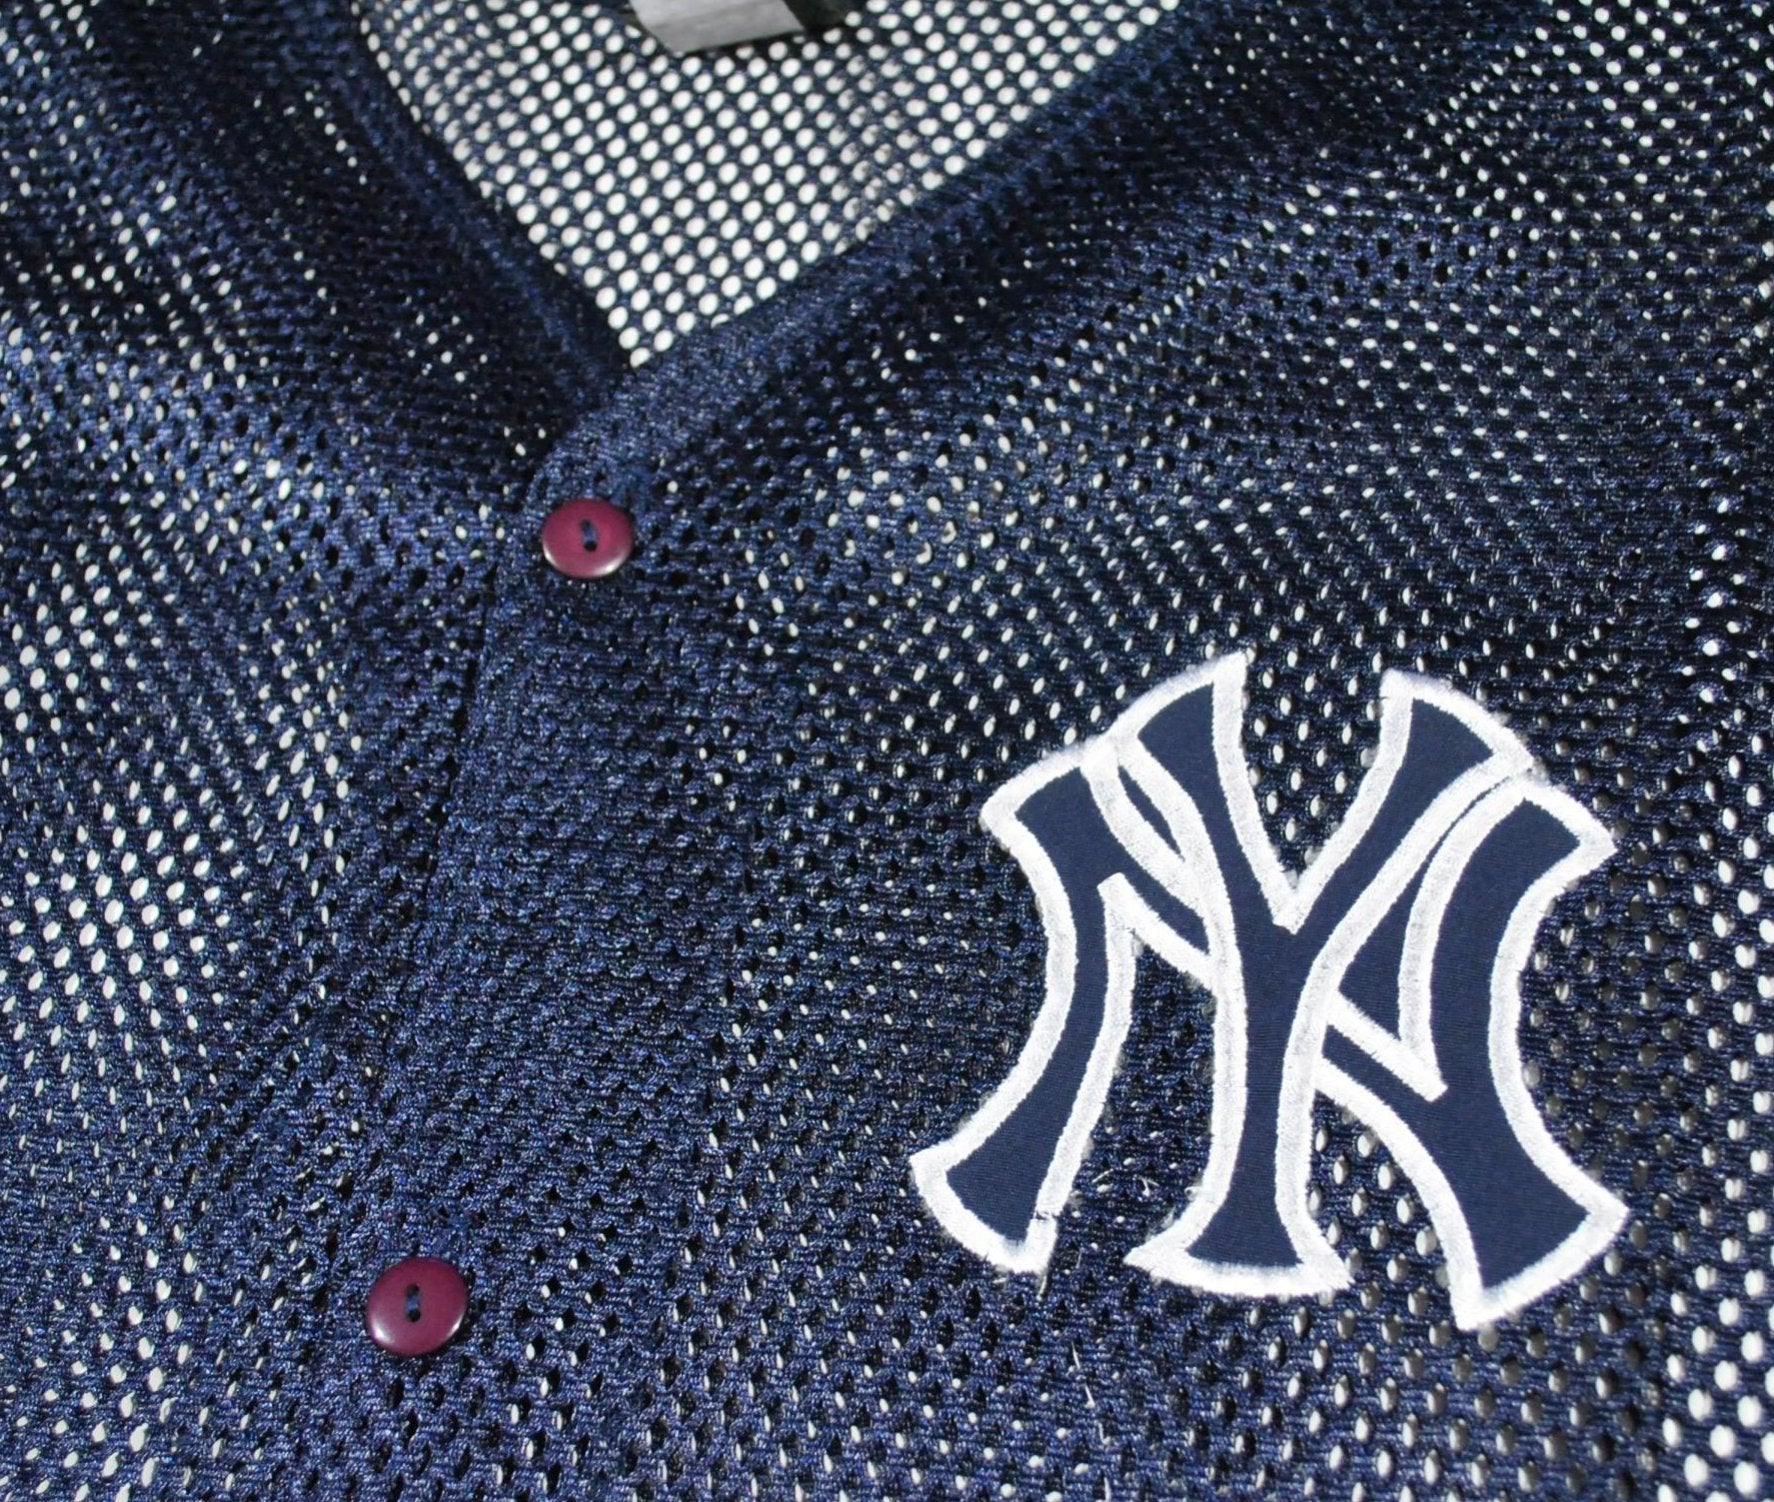 New York Yankees - Jersey - Majestic Stitched sz XL – Overtime Sports